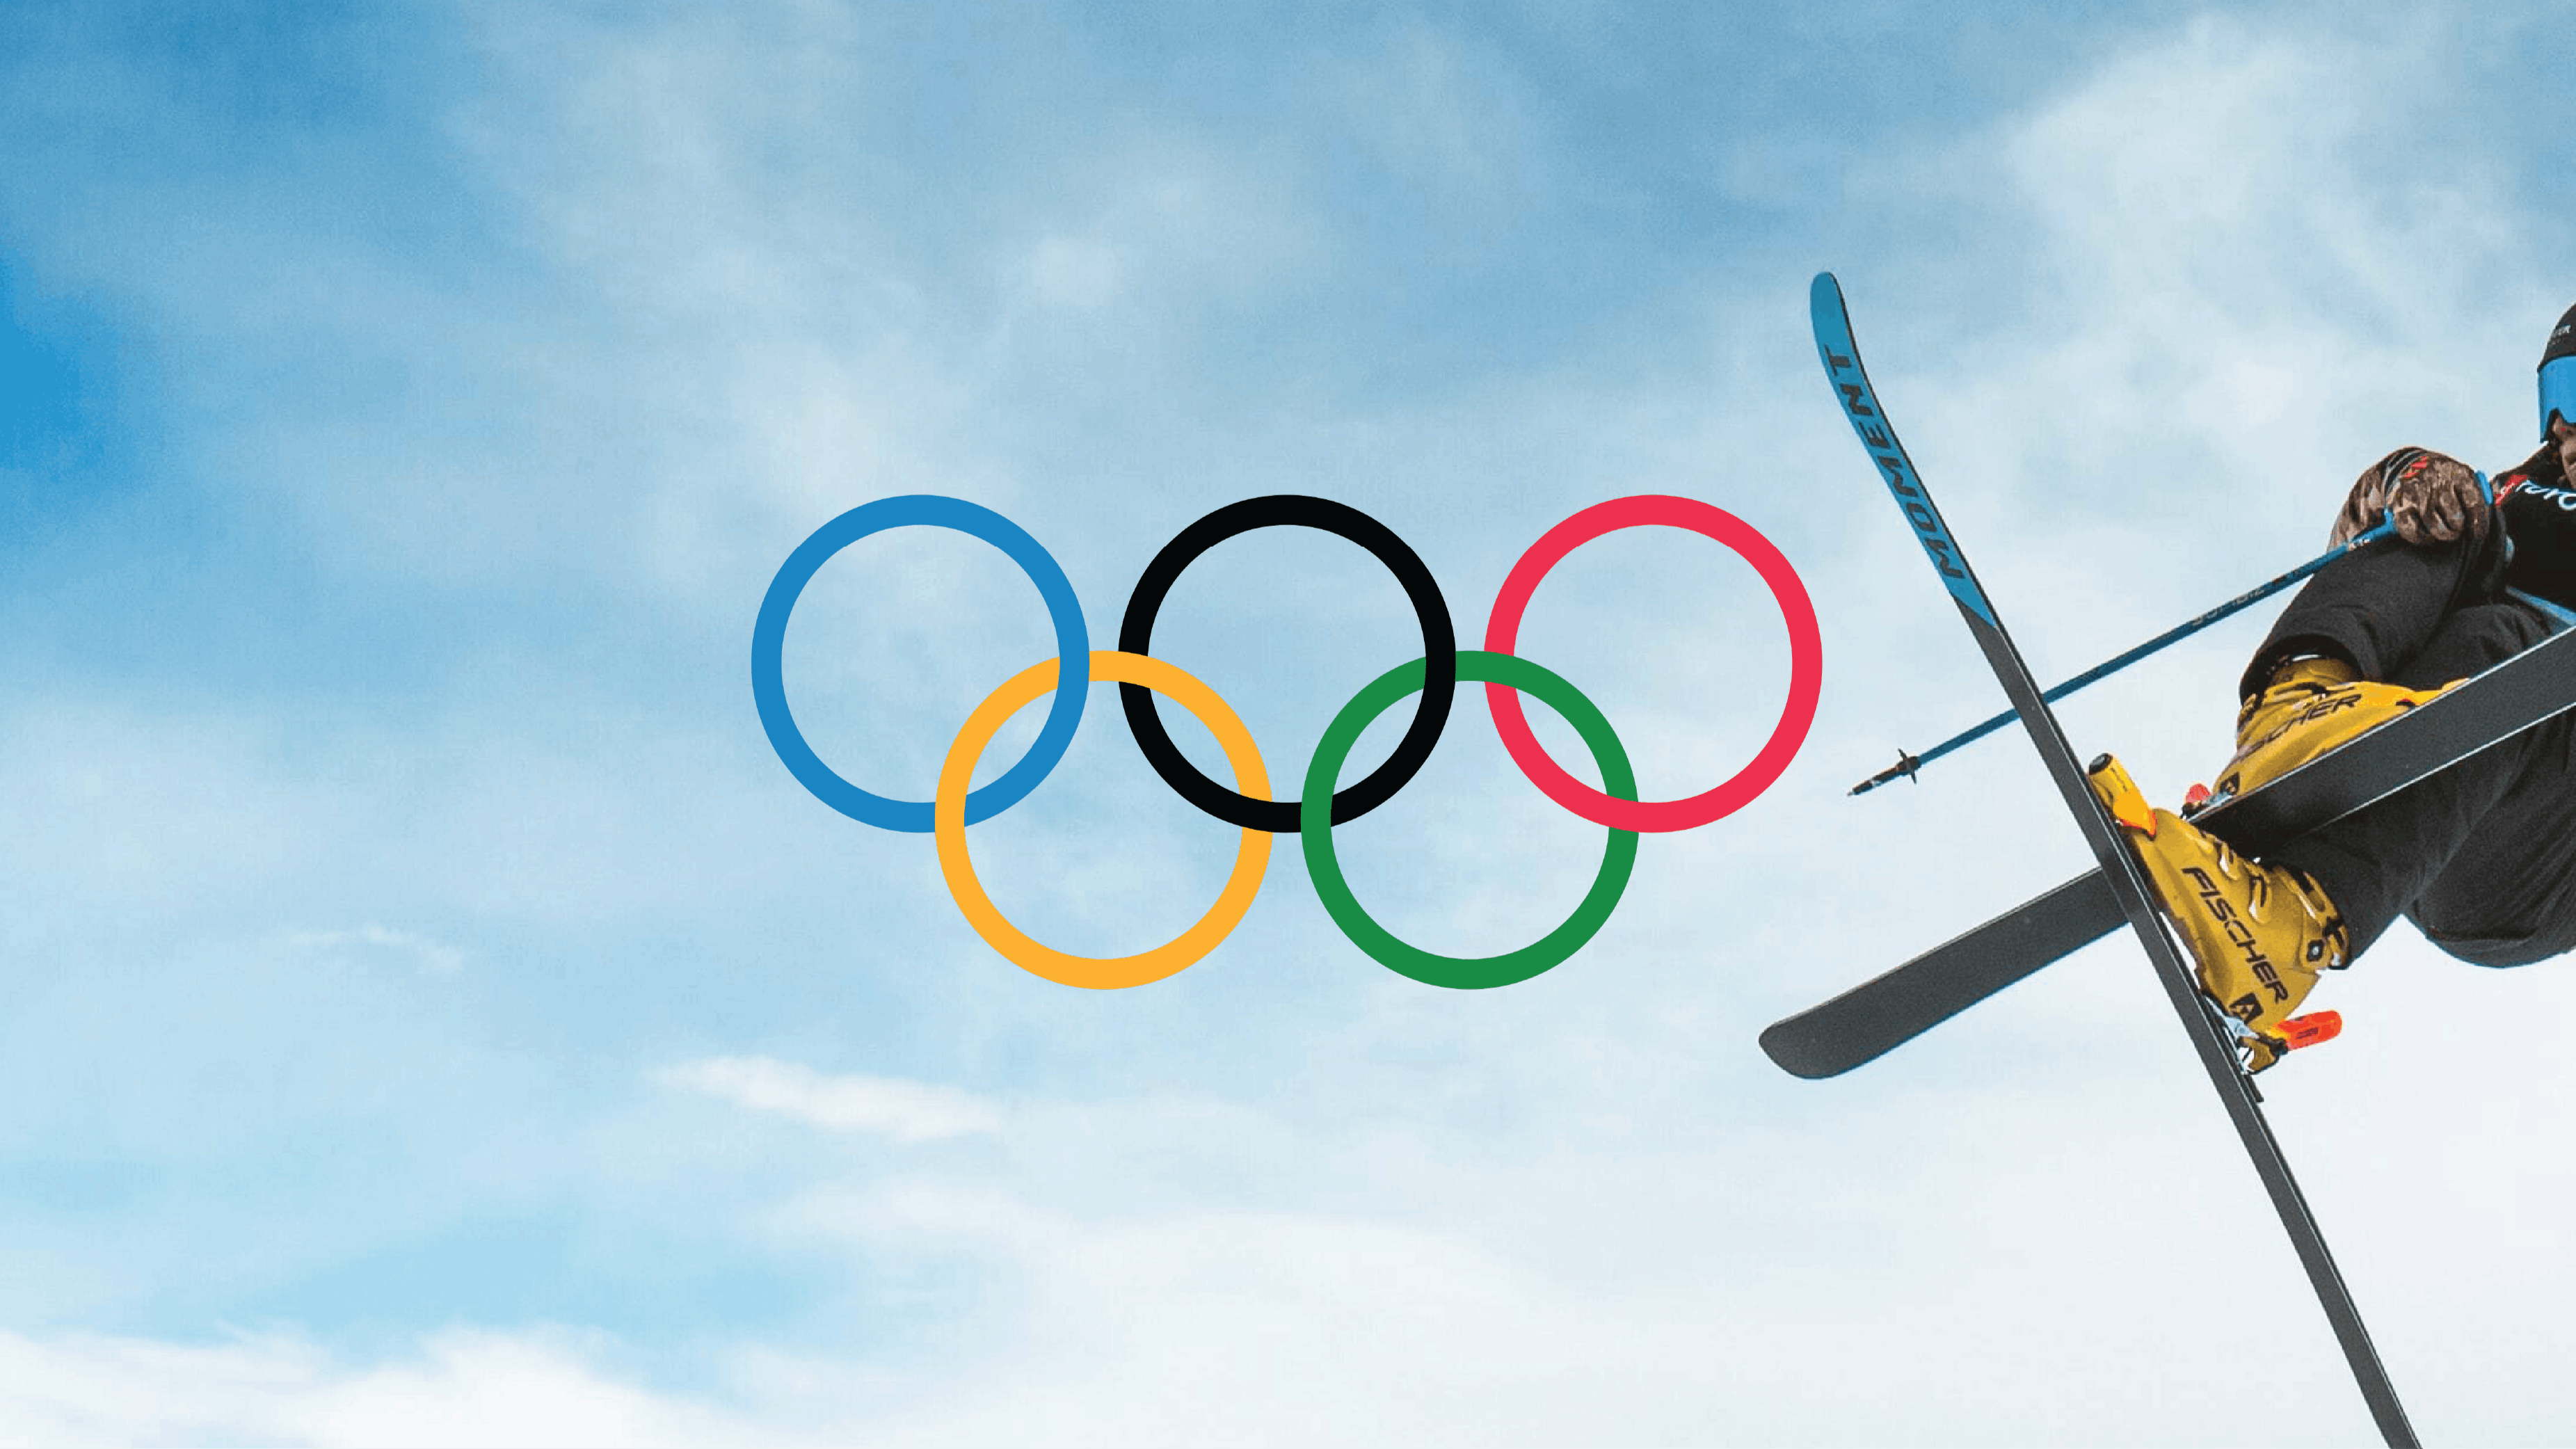 A skier jumps in the air and crosses his skis. The sky behind him is blue and dusted with clouds. The Olympic rings are added on top.